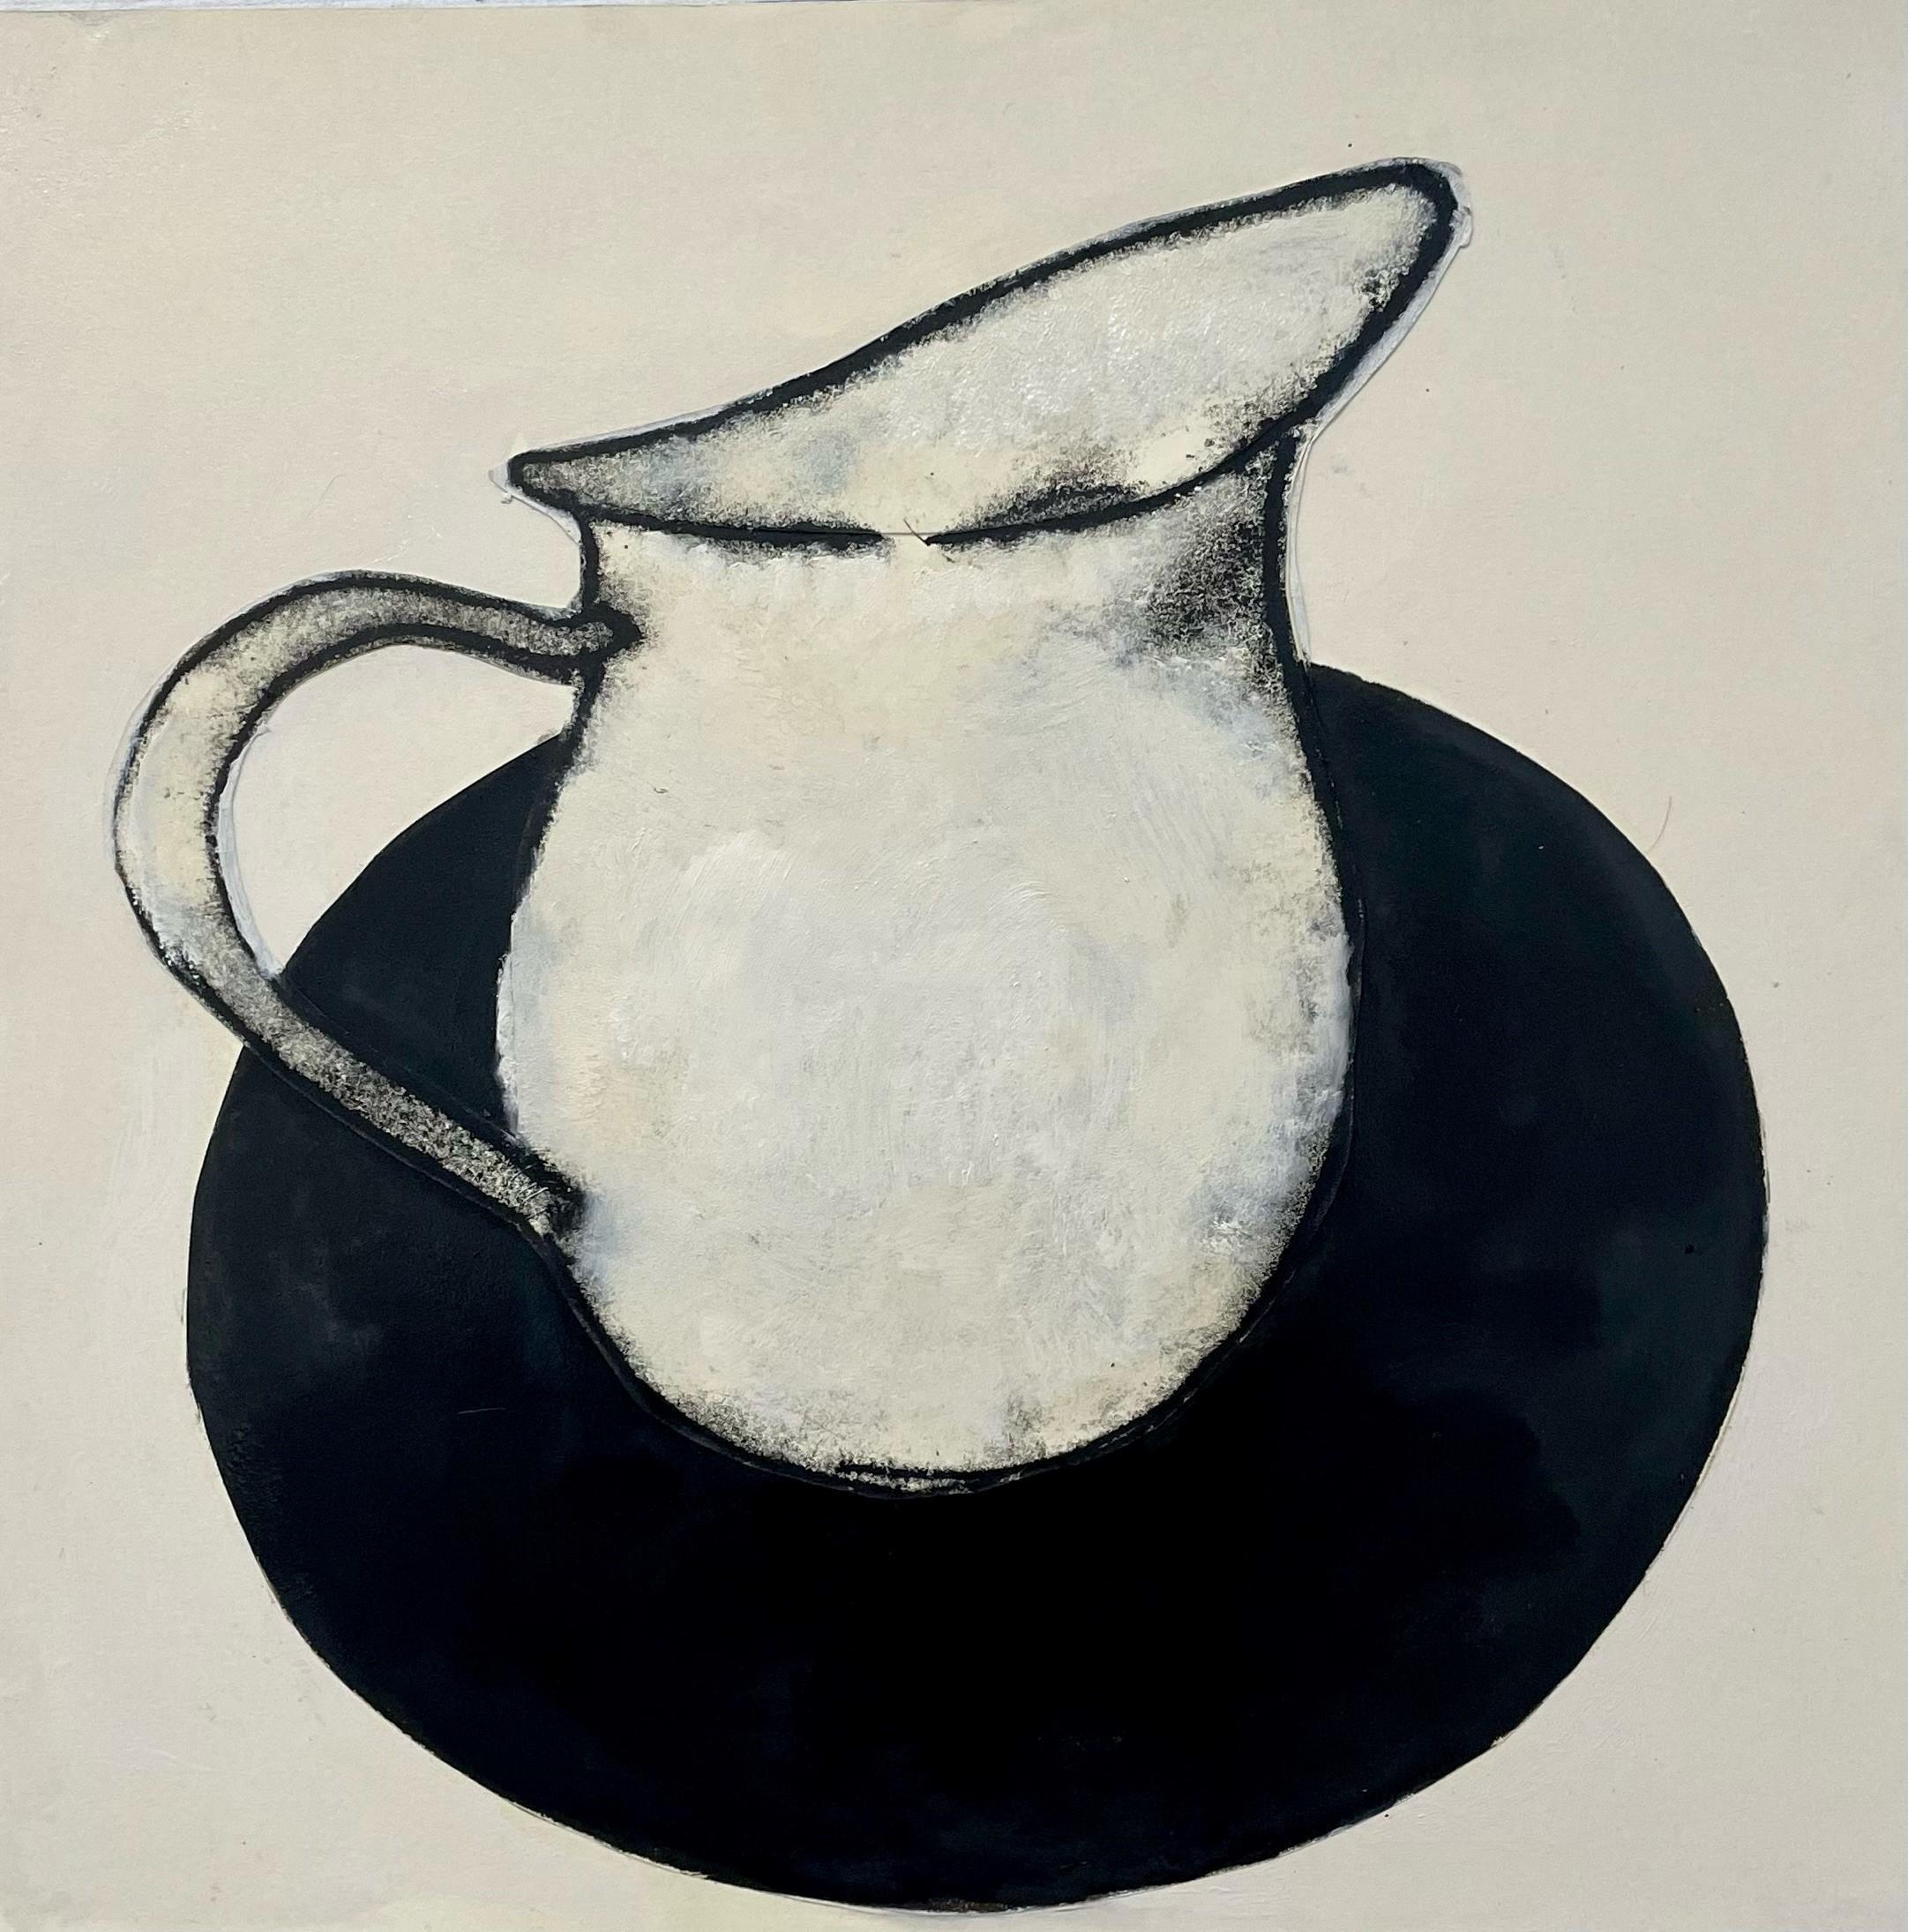 Pitcher (Contemporary Graphic Black & White Still Life Collage) - Mixed Media Art by David Konigsberg